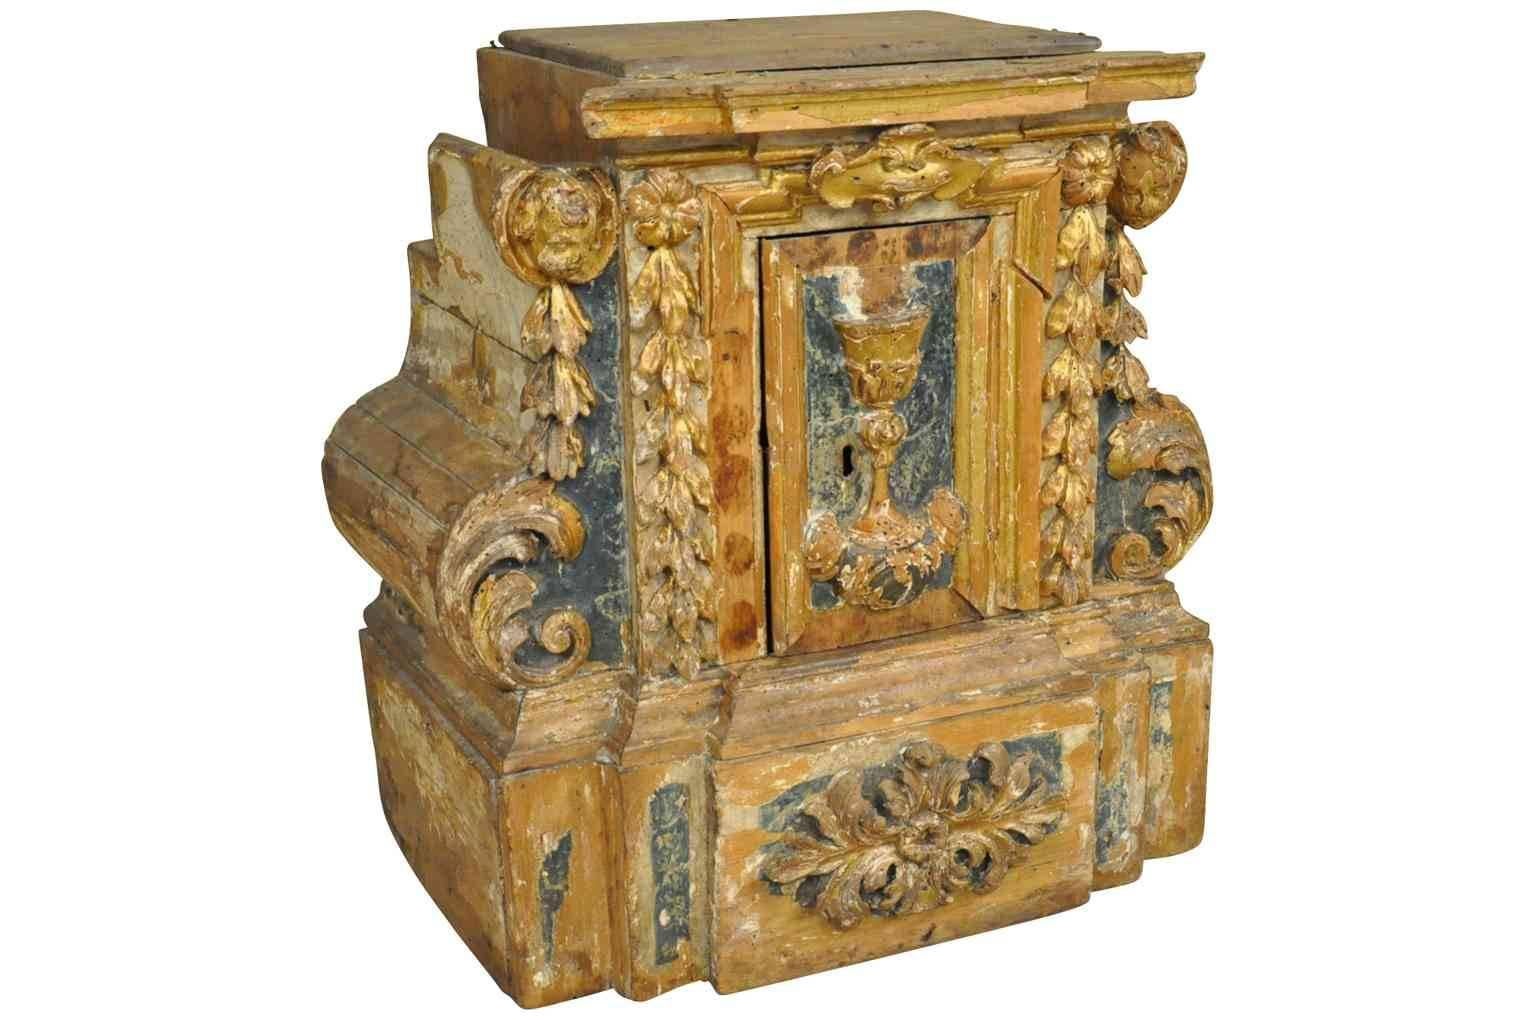 An exquisite 17th century Baroque tabernacle niche from Northern Italy. A stunning altarpiece constructed from polychromed and giltwood.